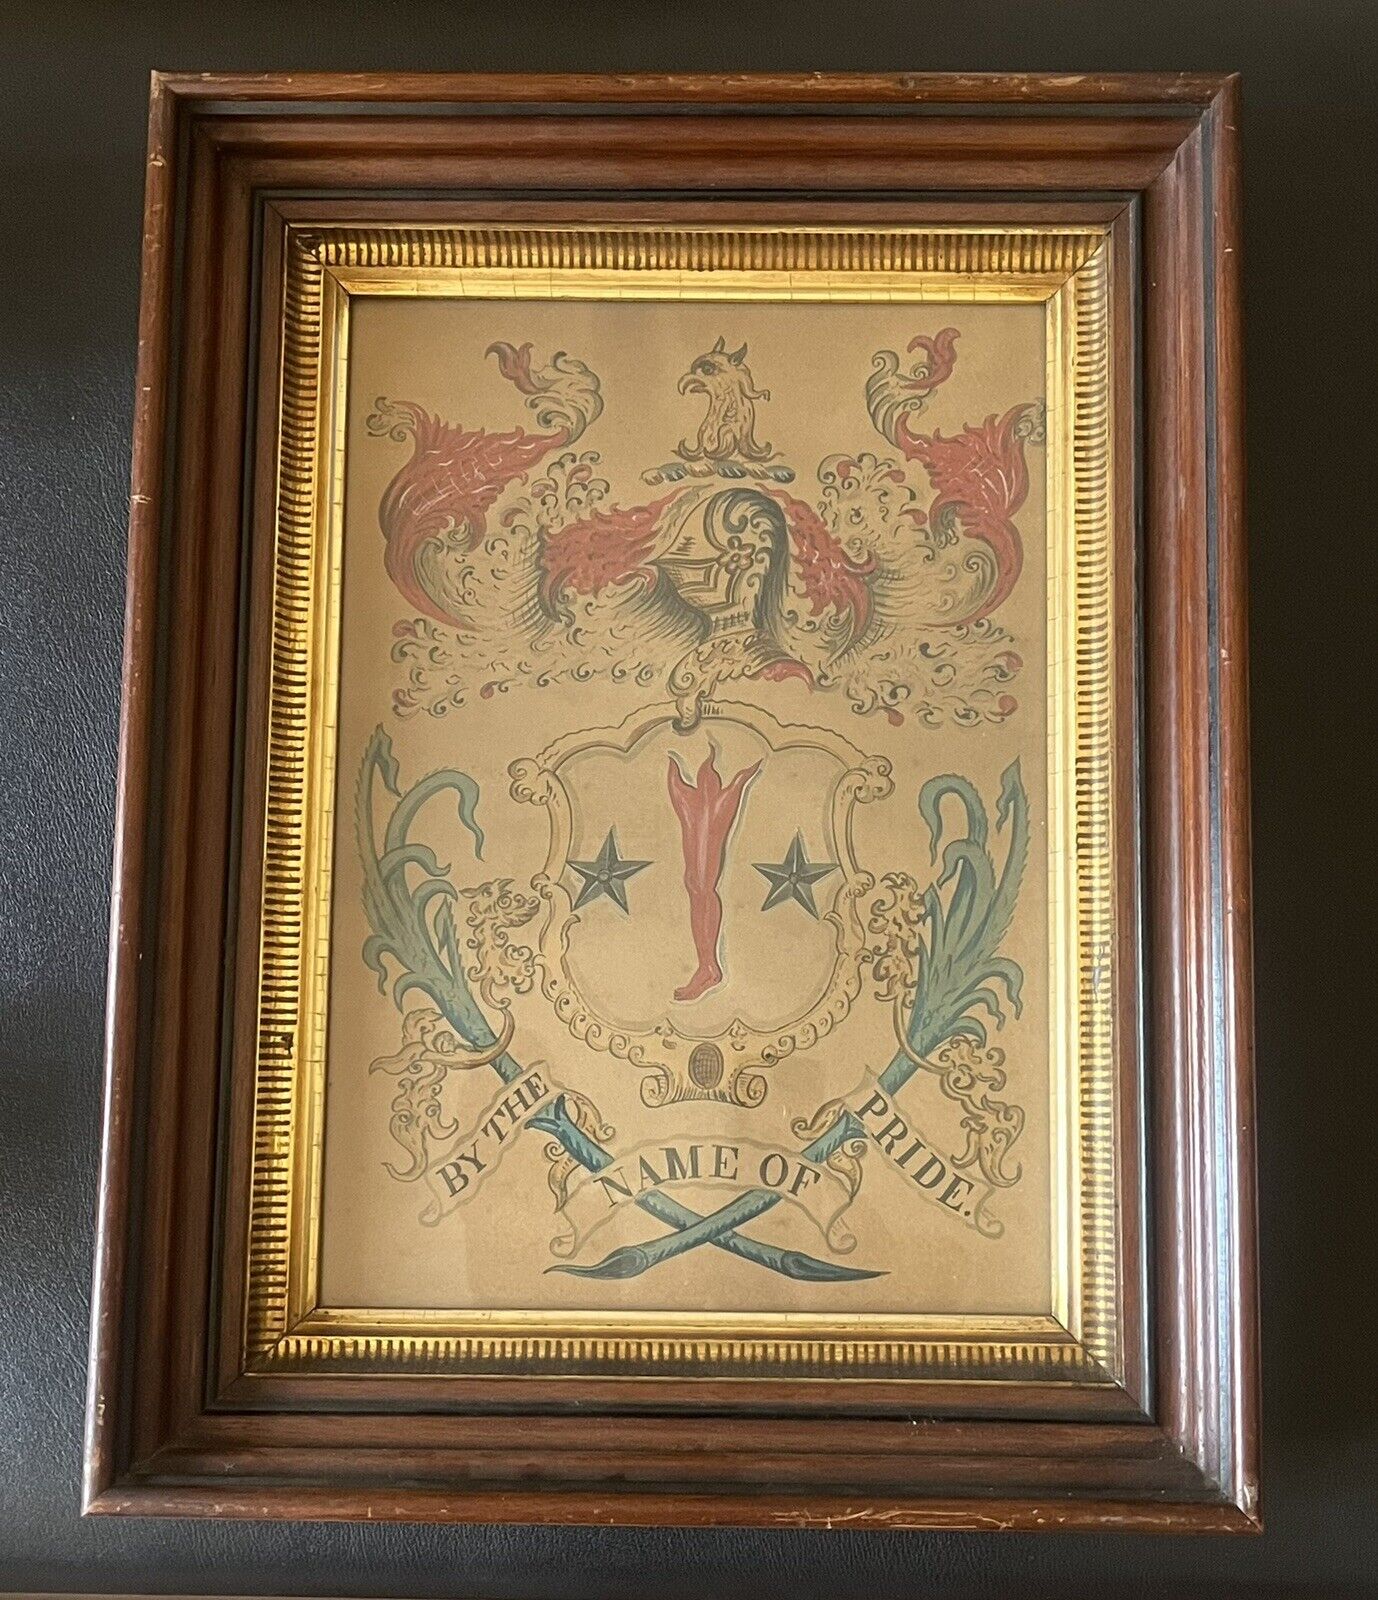 UNIQUE Antique Coat of Arms Crest Drawing “By The Name of Pride